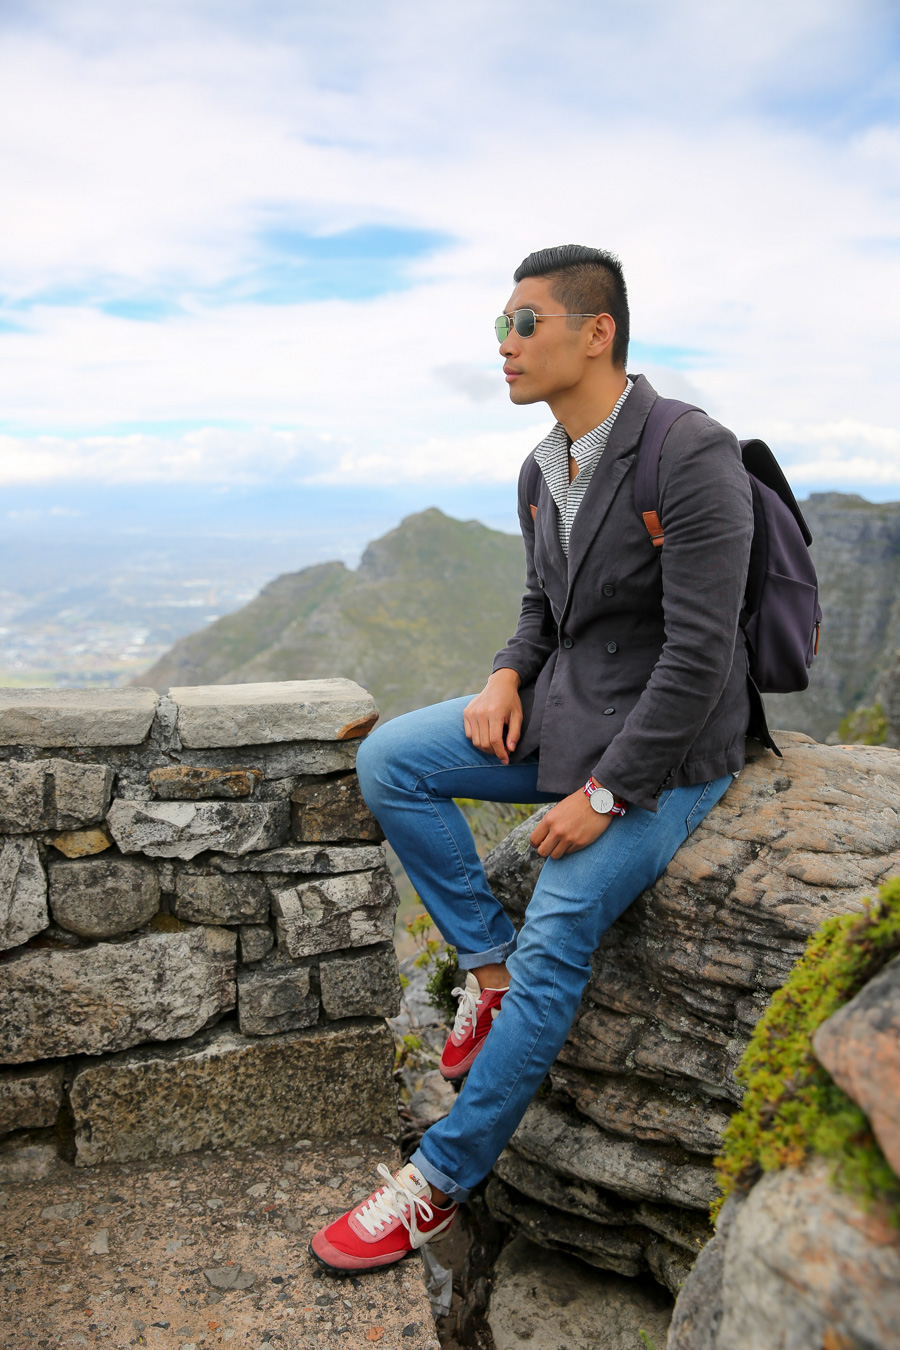 Table Mountain, Everlane Backpack, Levitate Style, Travel, Menswear, Cape Town, What to Wear